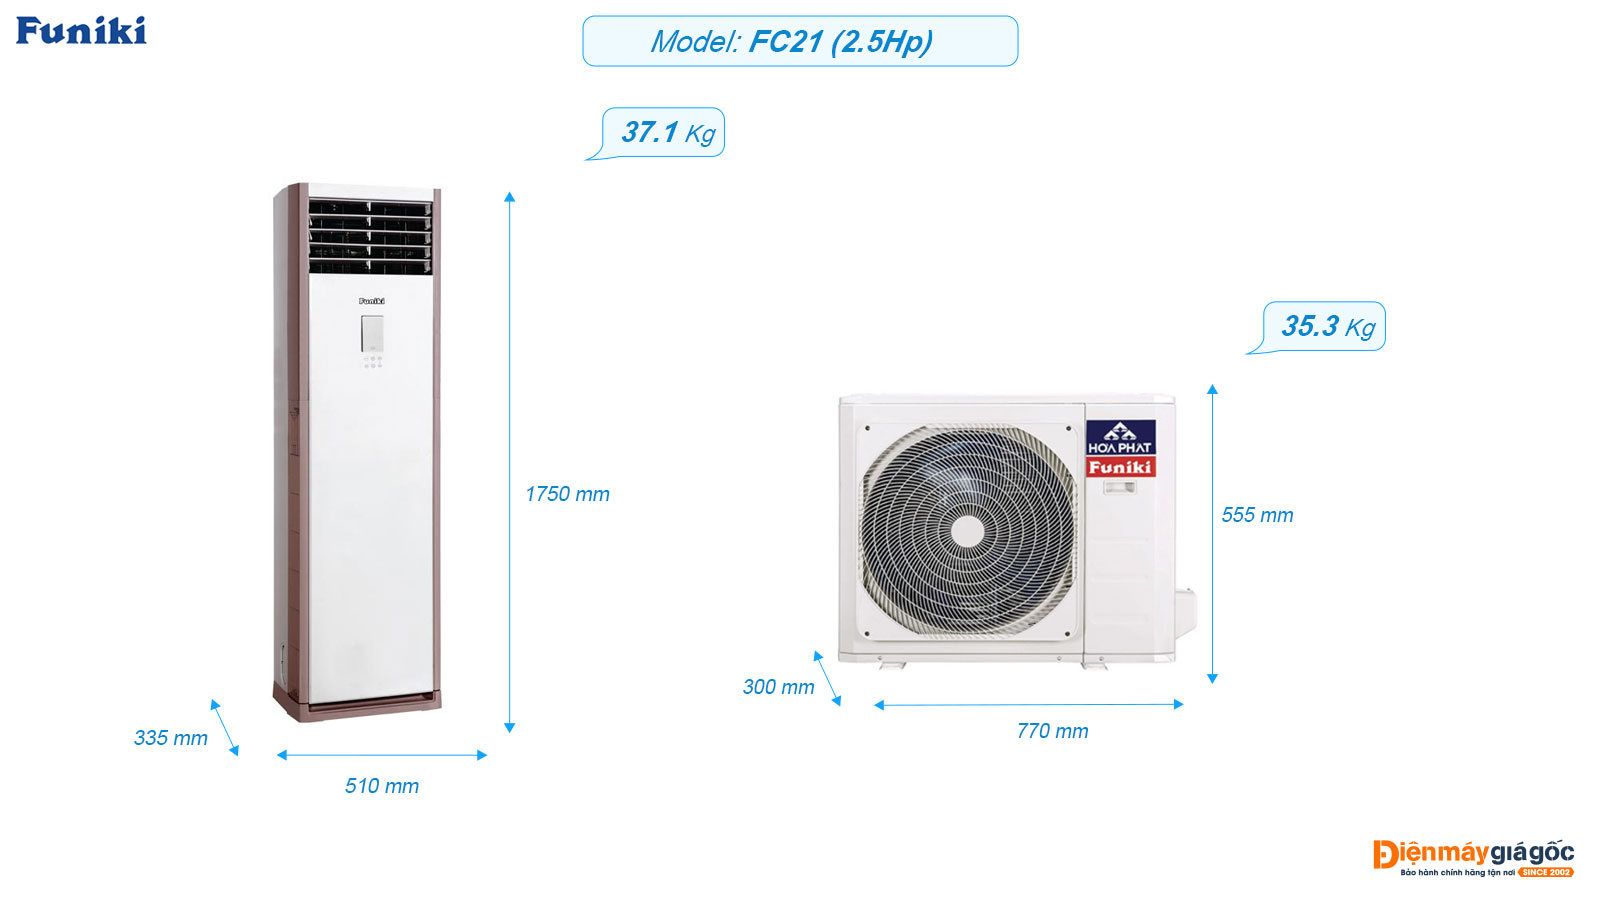 Funiki floor standing air conditioning FC21 (2.5Hp)